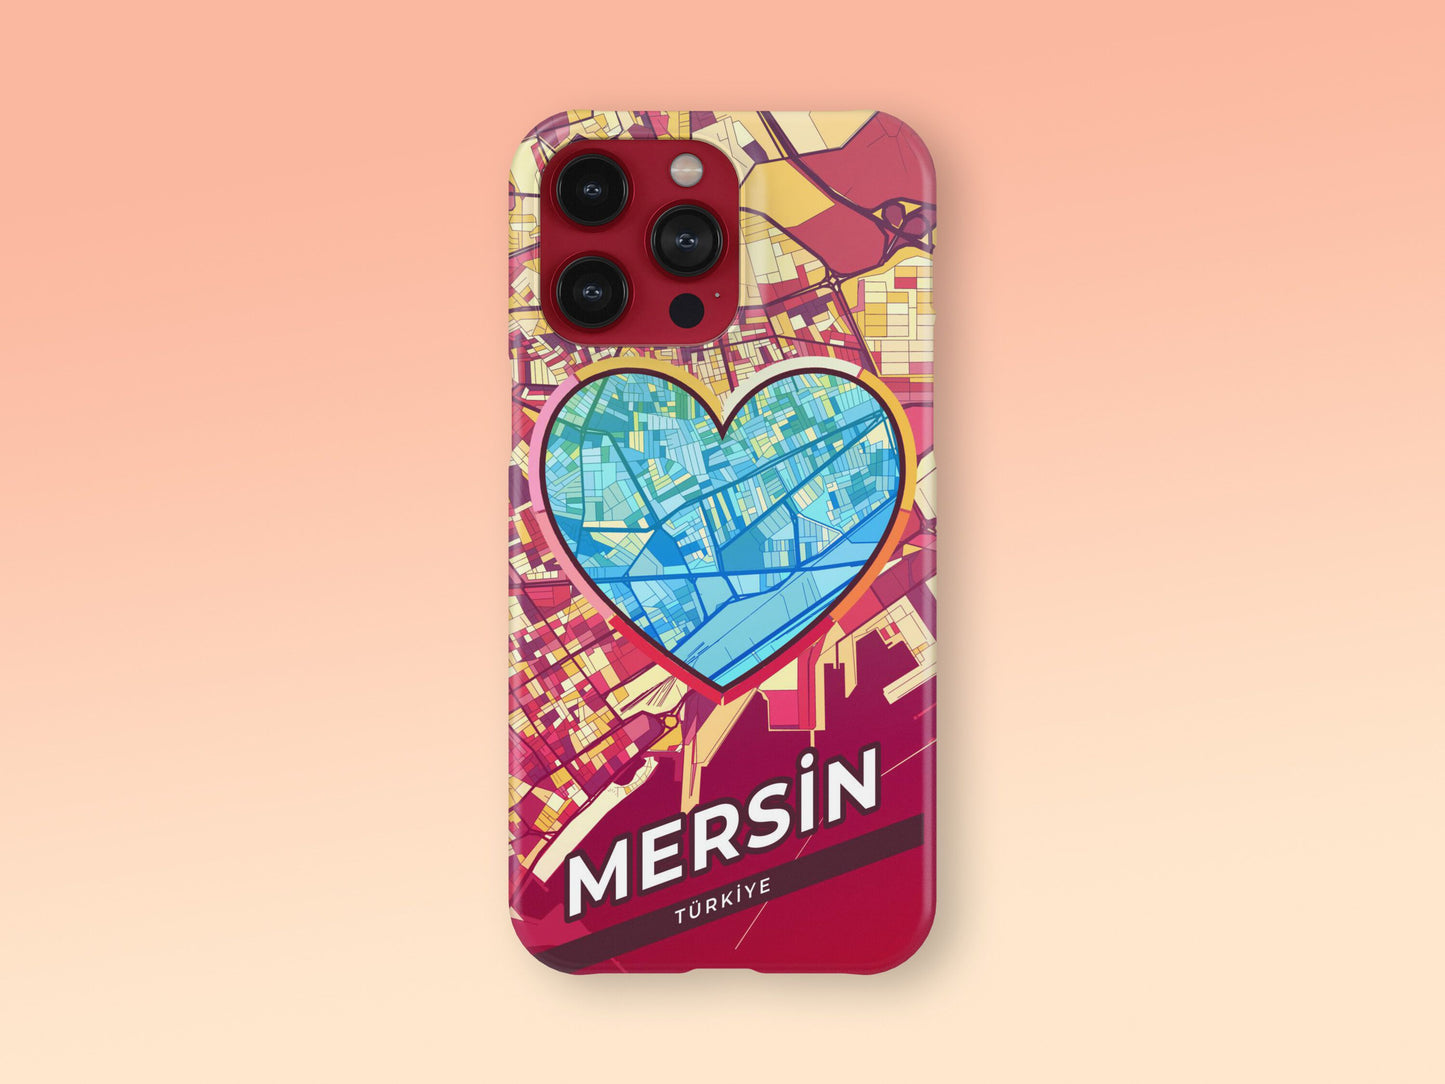 Mersin Turkey slim phone case with colorful icon 2